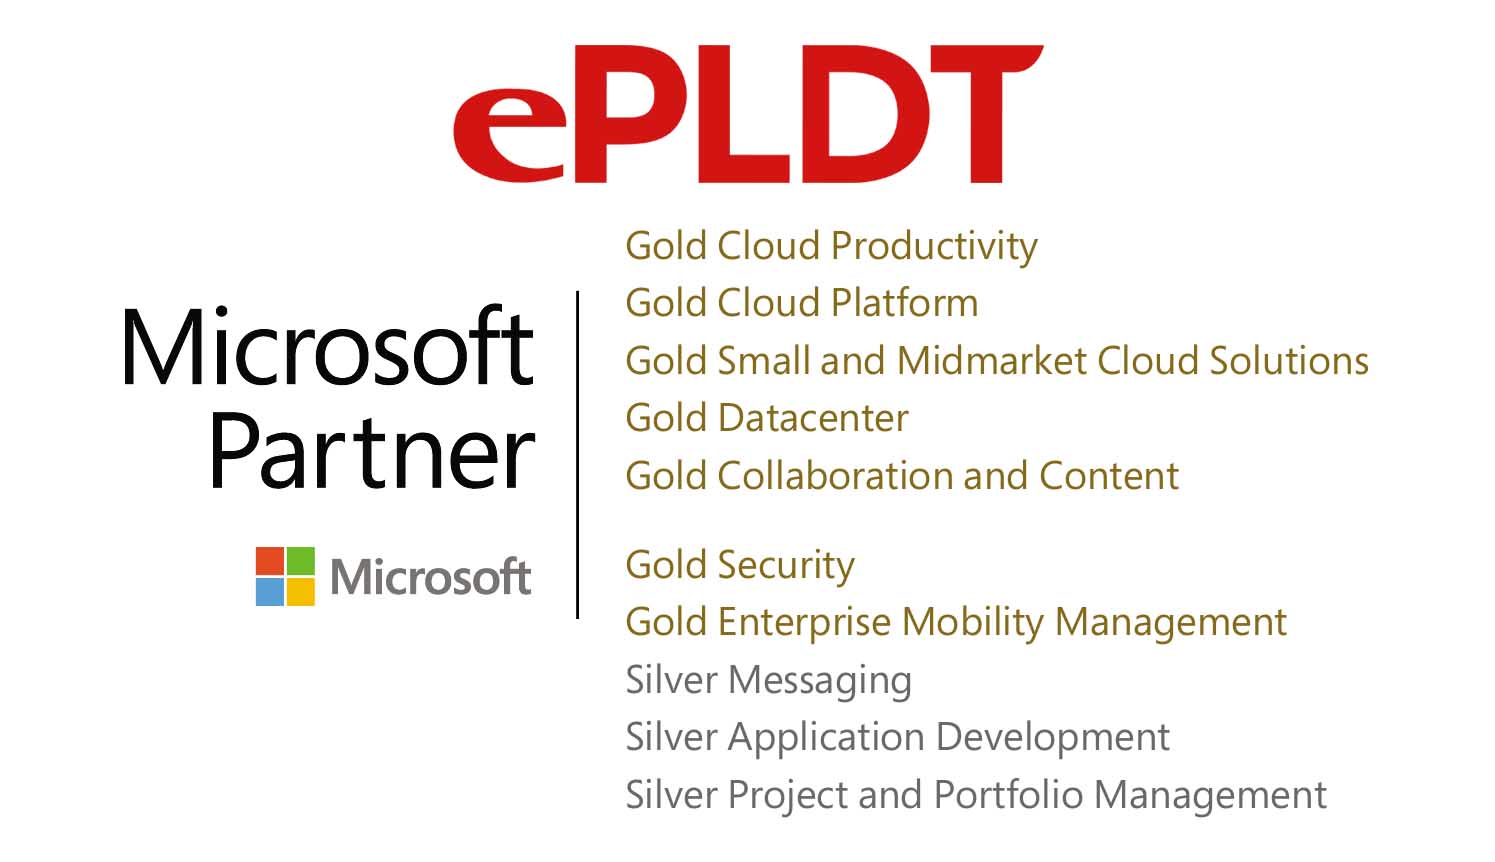 ePLDT Achieves a Microsoft Gold Competency for Security and Enterprise Mobility Management, and Silver Competency for Project Portfolio Management